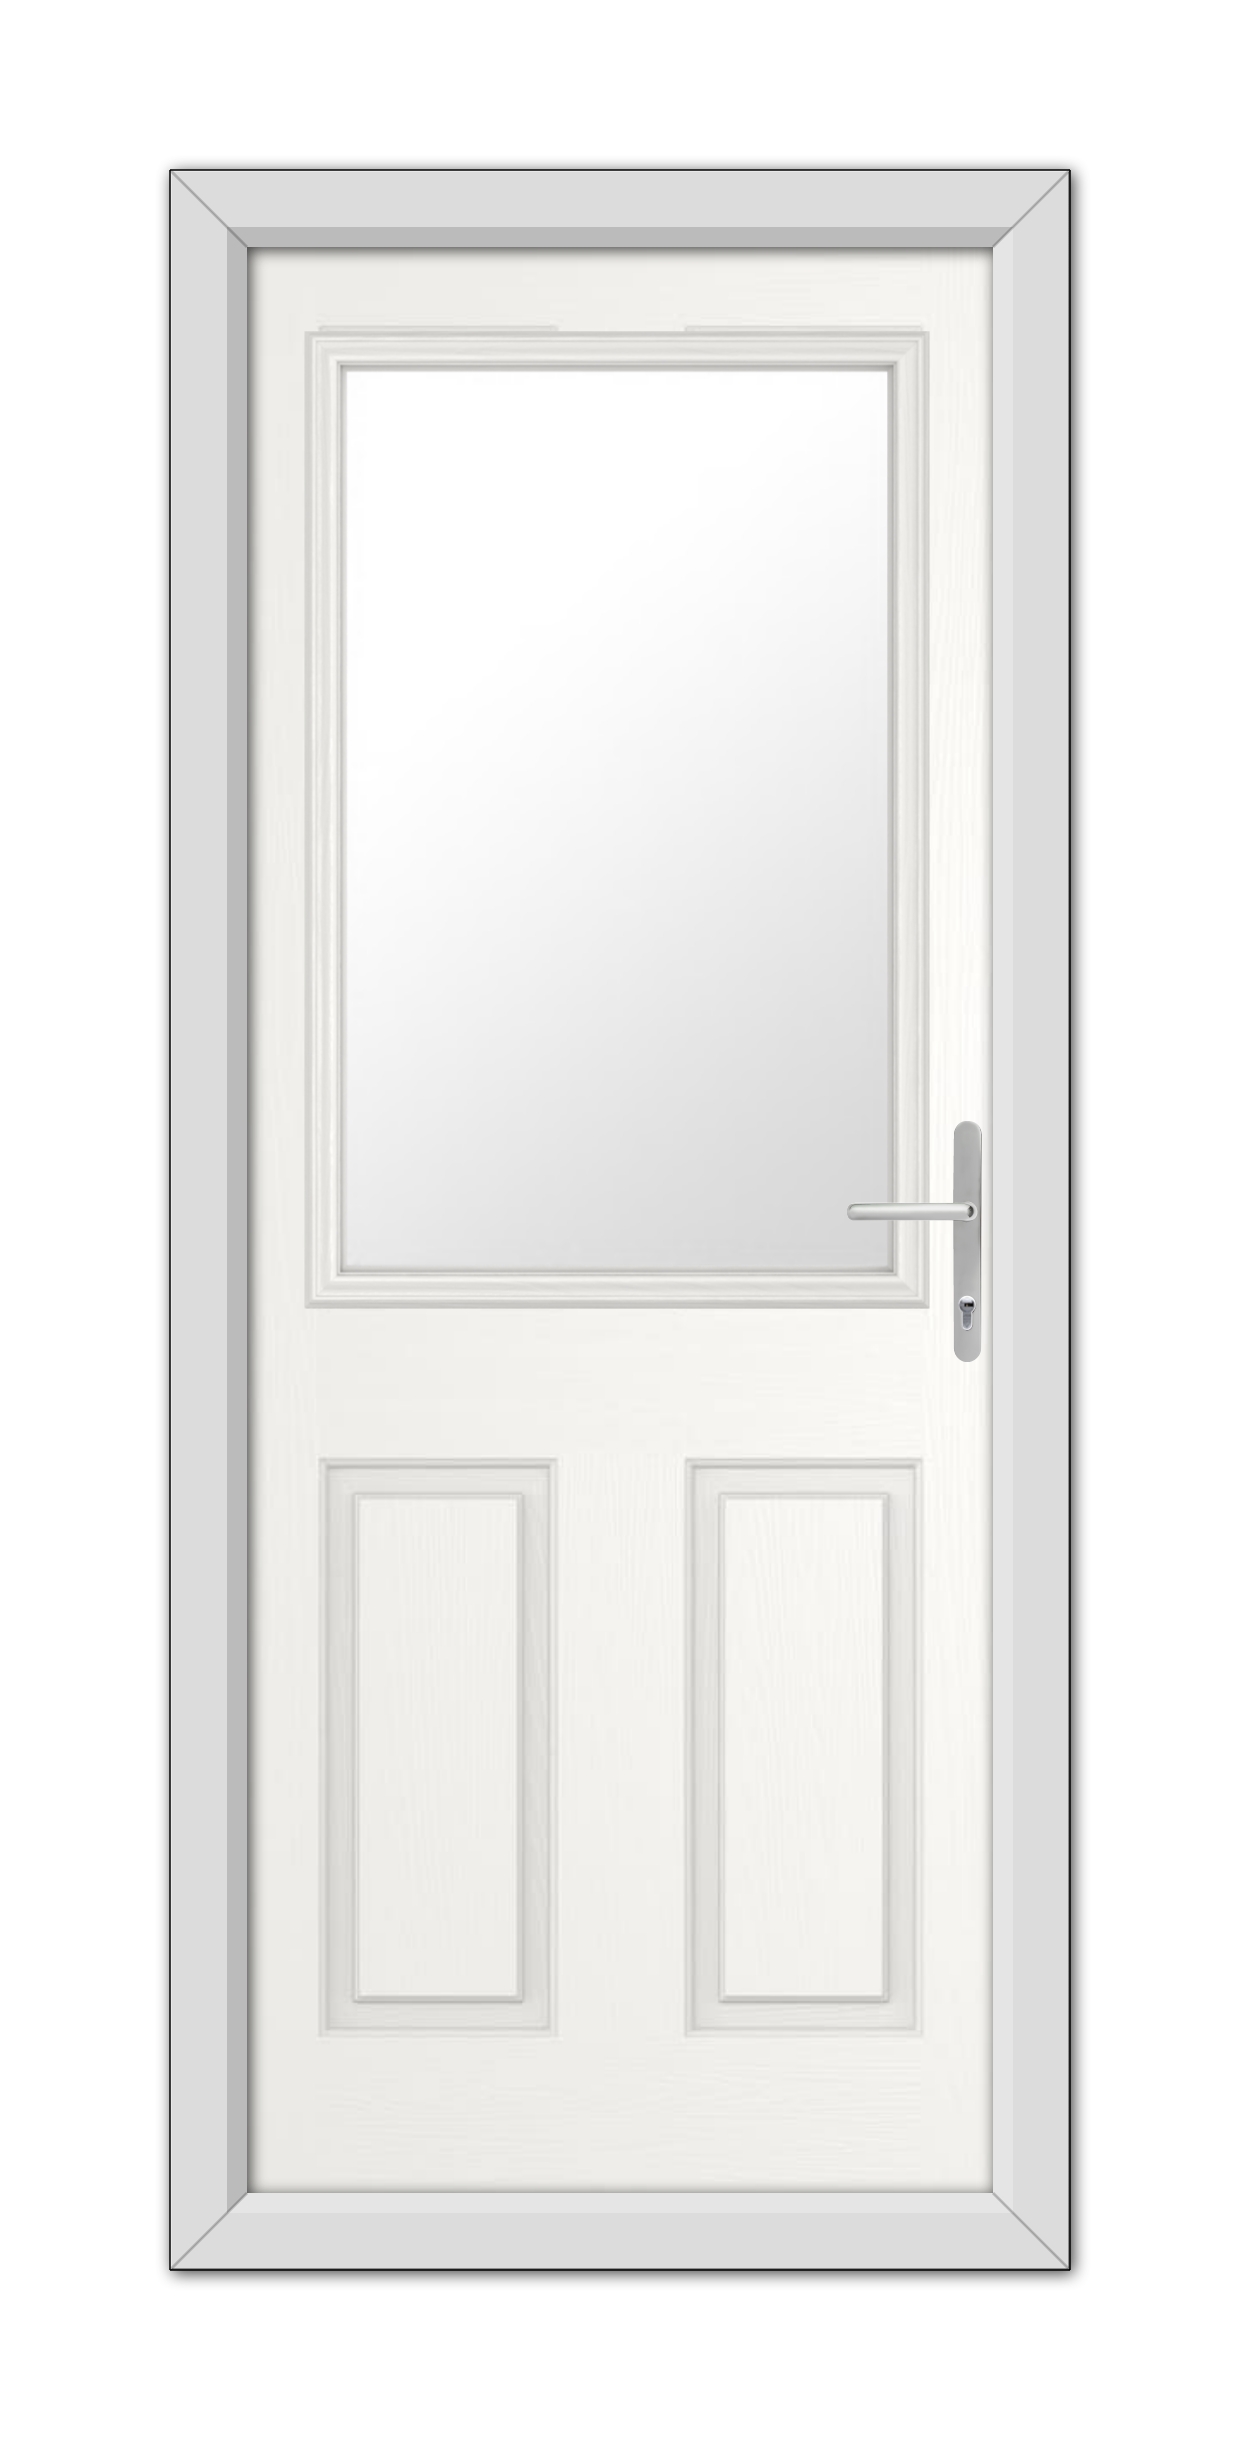 A White Buxton Composite Door 48mm Timber Core with a frosted glass window on the upper half, featuring a metallic handle on the right side, set within a simple frame.